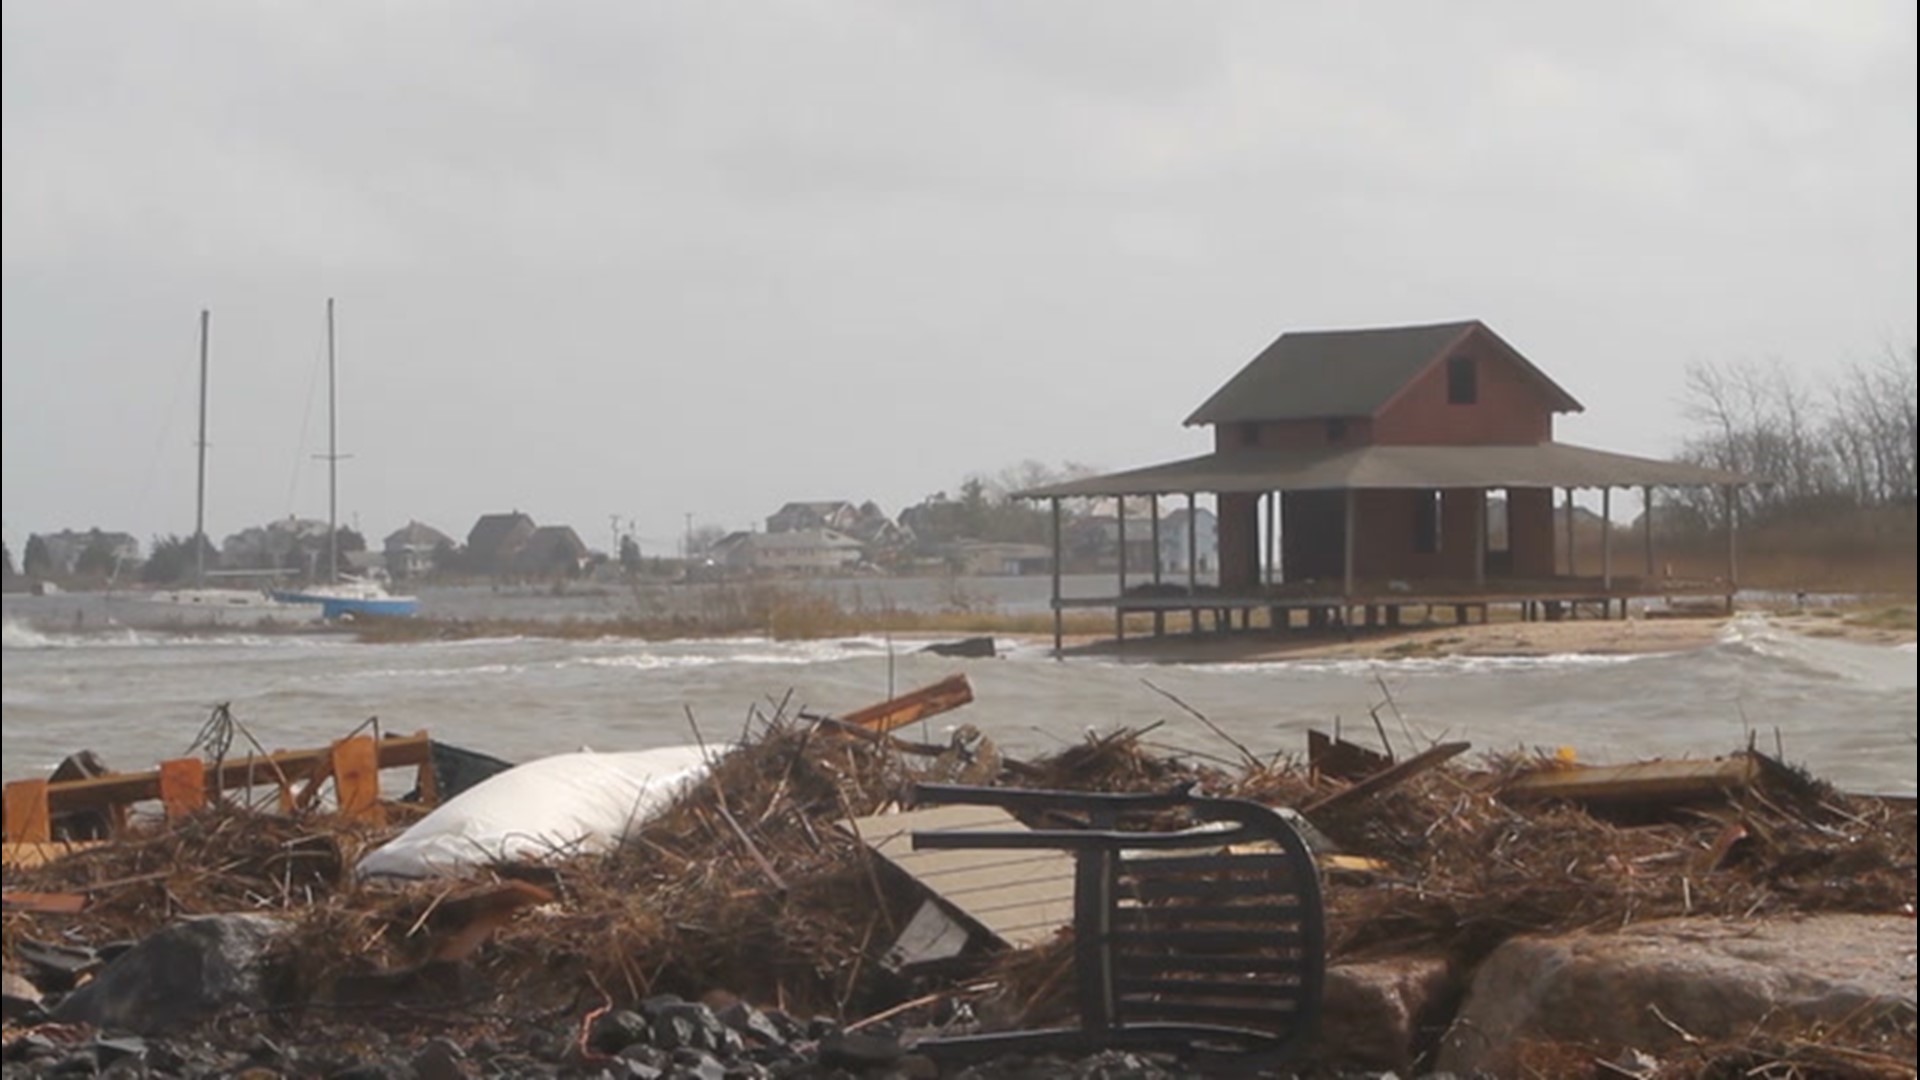 Eight years since Sandy made landfall in New Jersey, one city reflects on where they are in rebuilding.